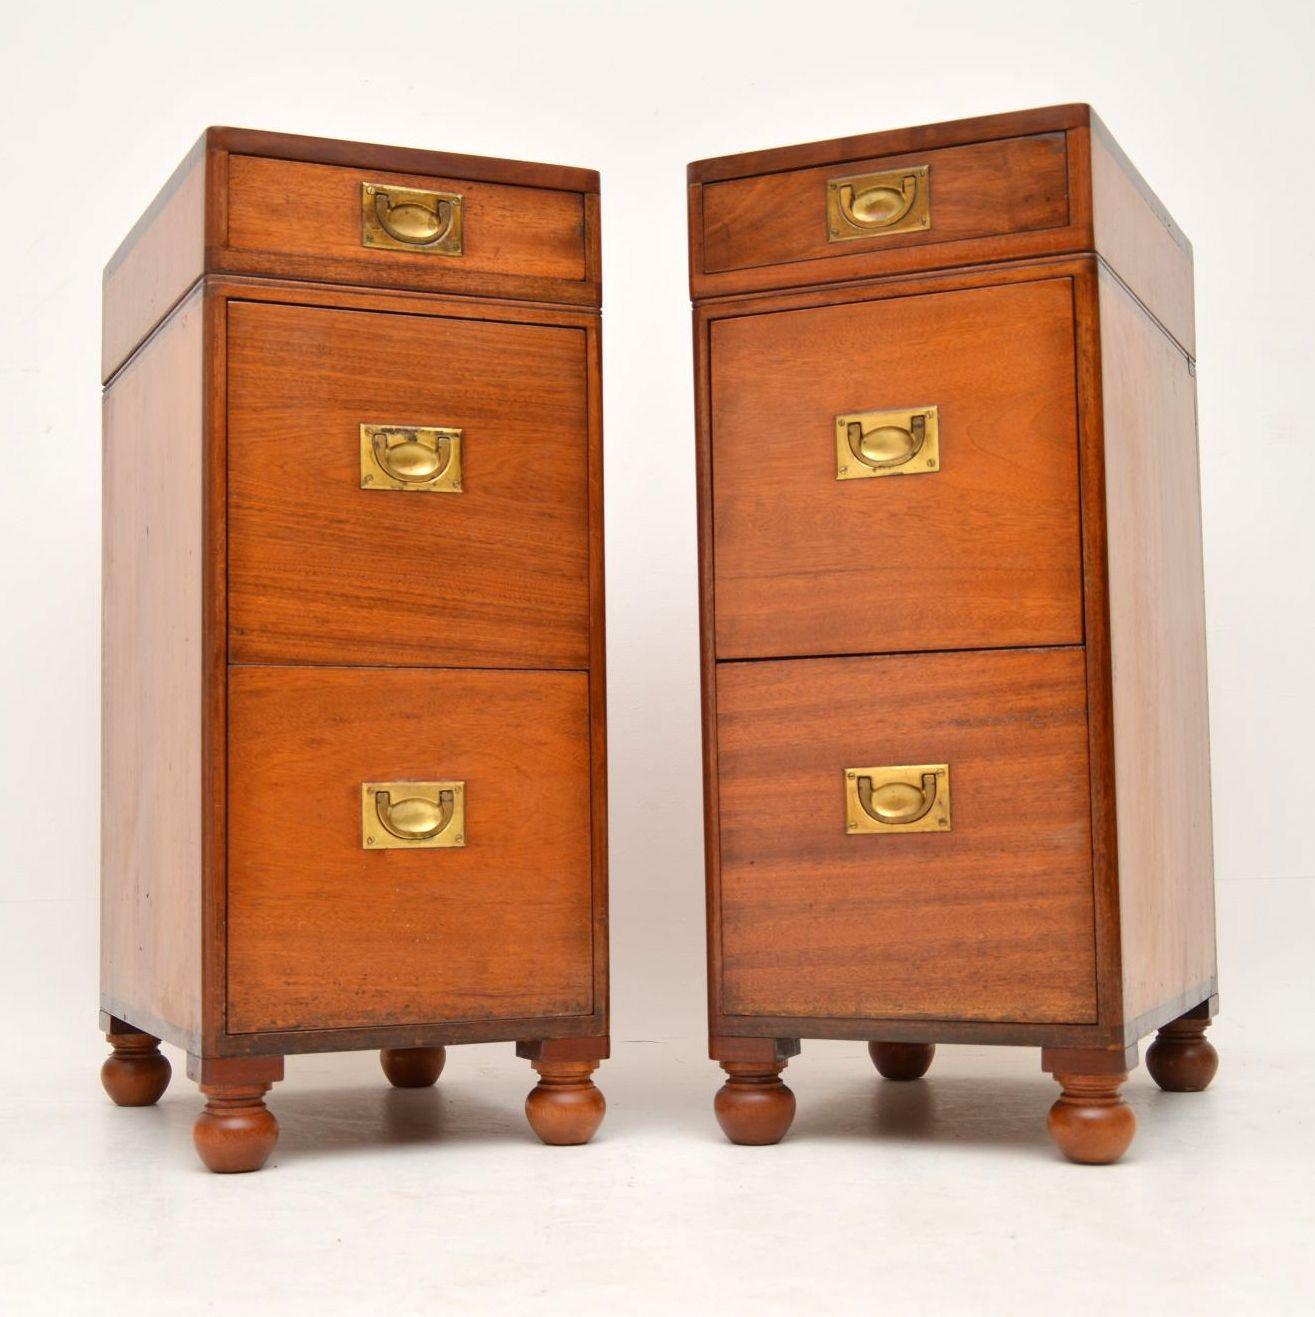 Large pair of antique mahogany naval Campaign style bedside chests, which could be used for other purposes. I would date these to circa 1890s period and they are in excellent condition. Two of the drawers are very deep and they all have the original